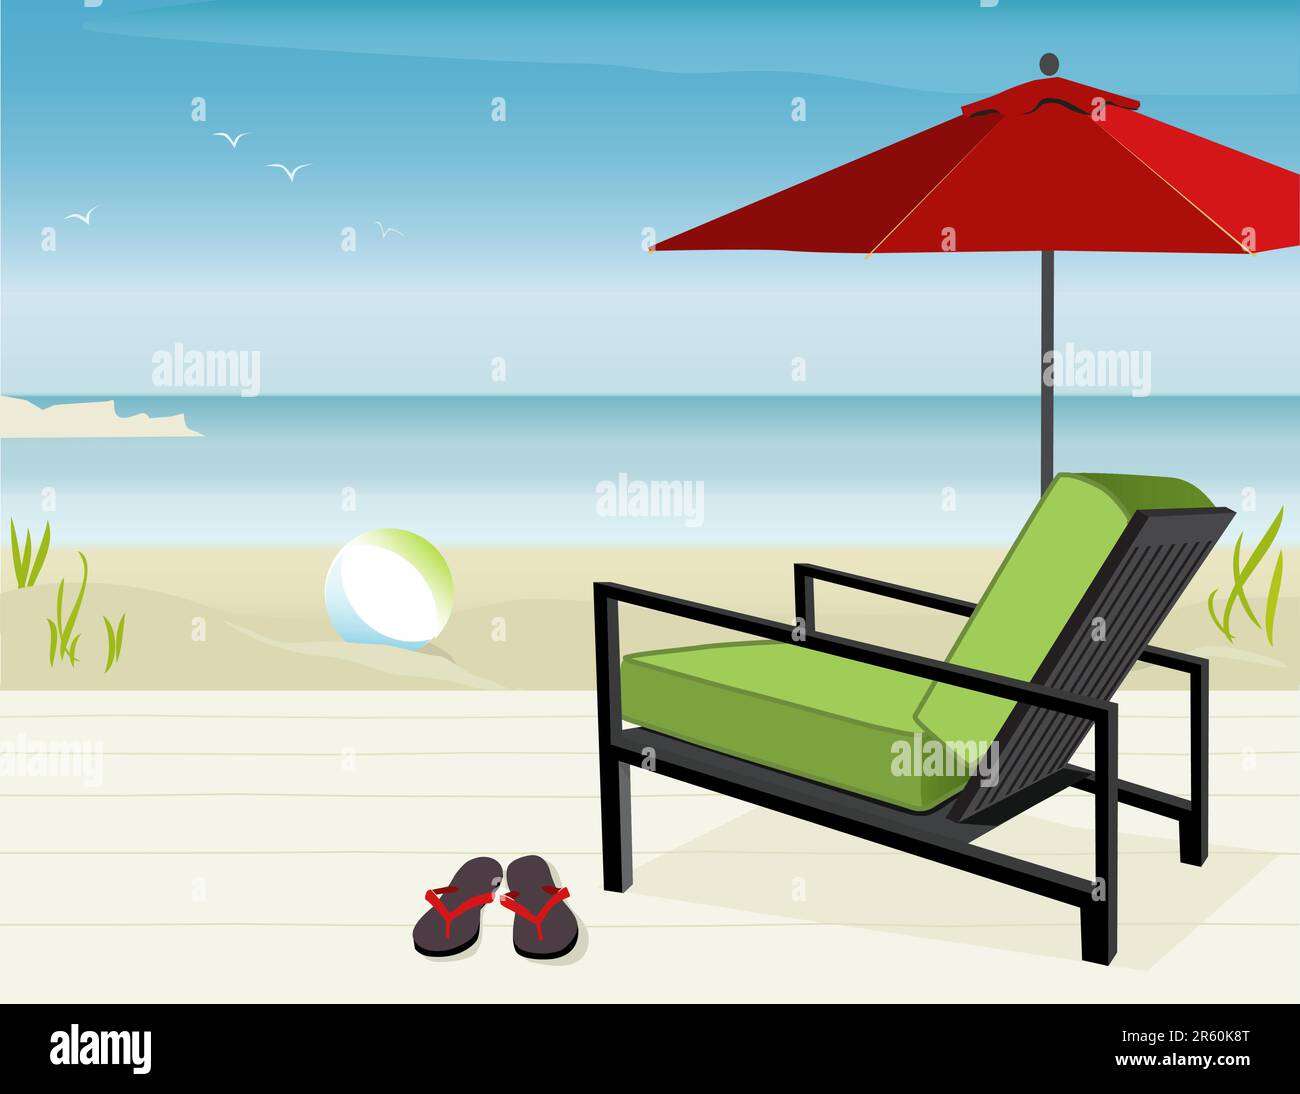 Modern Chair and Market Umbrella at beach; Easy-edit layered file. Stock Vector